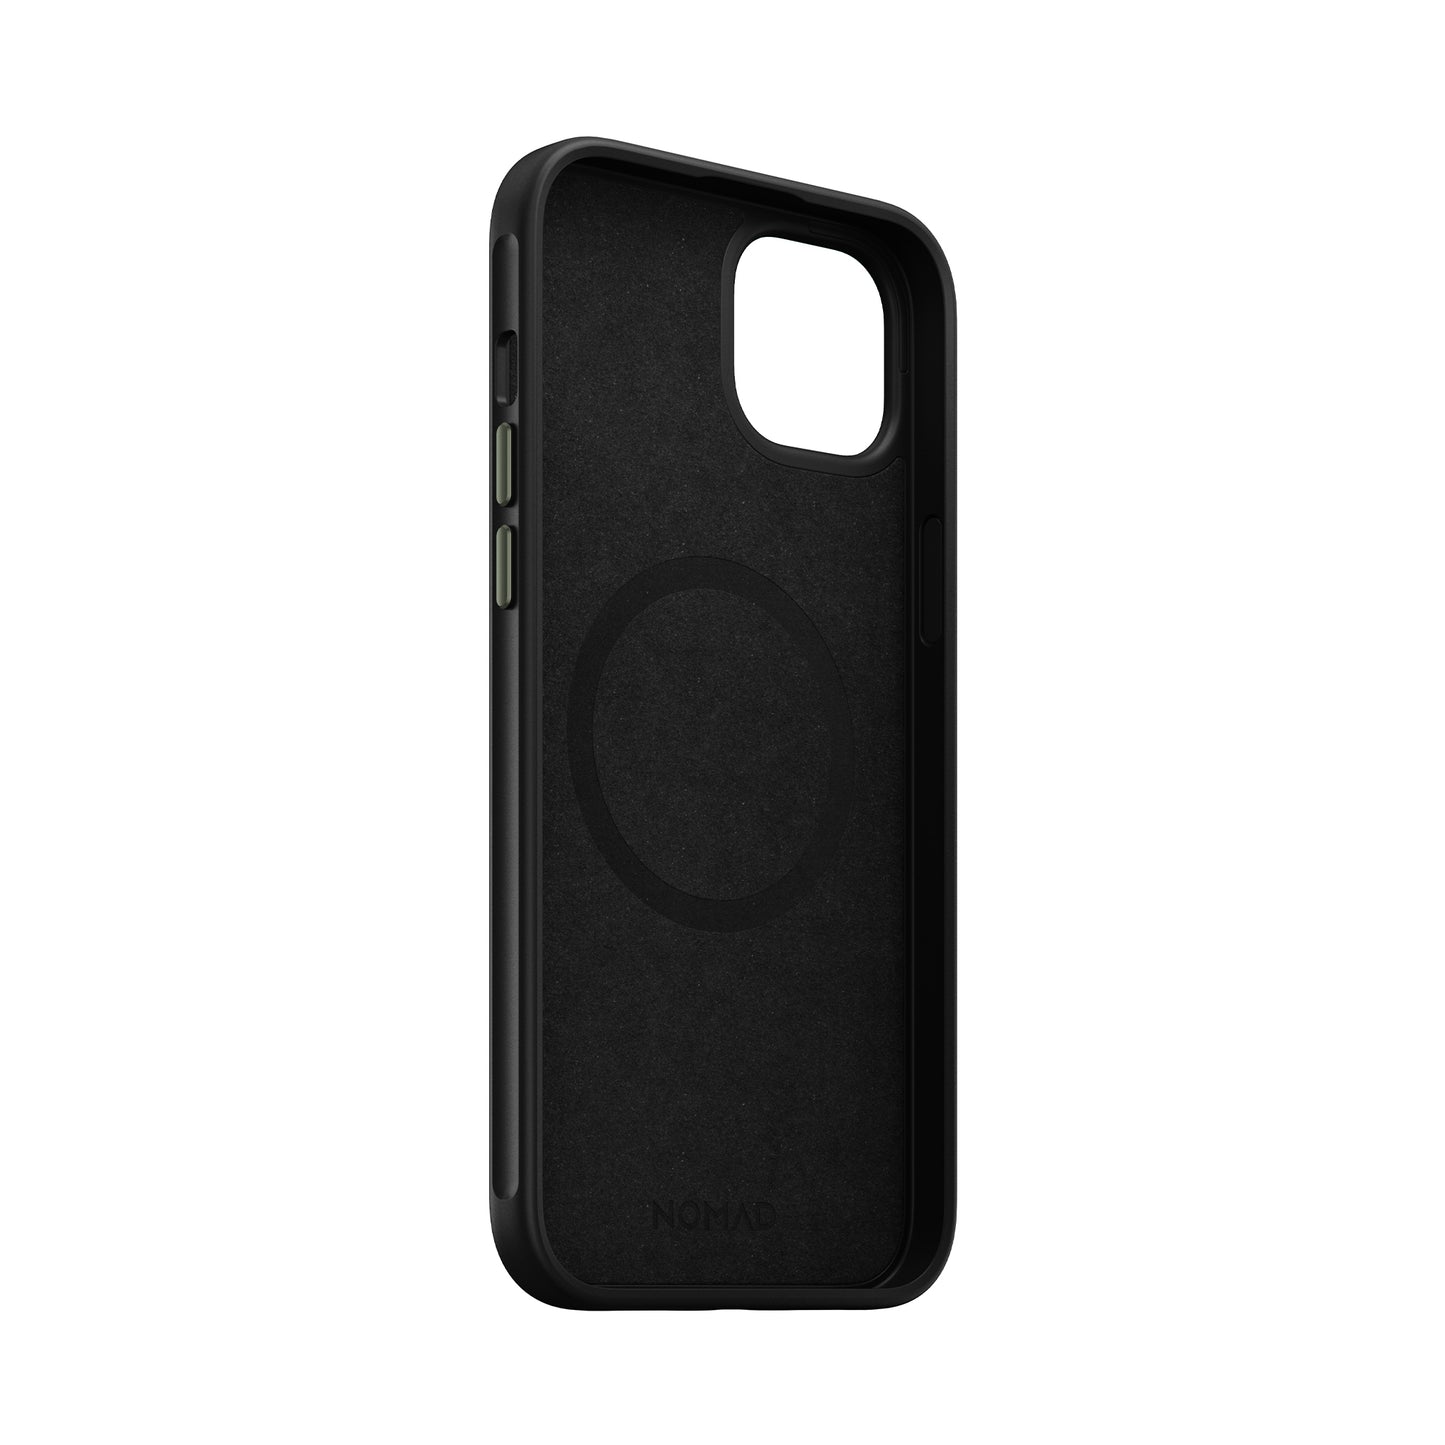 NOMAD Sport Case for iPhone 14 Plus - Ash Green